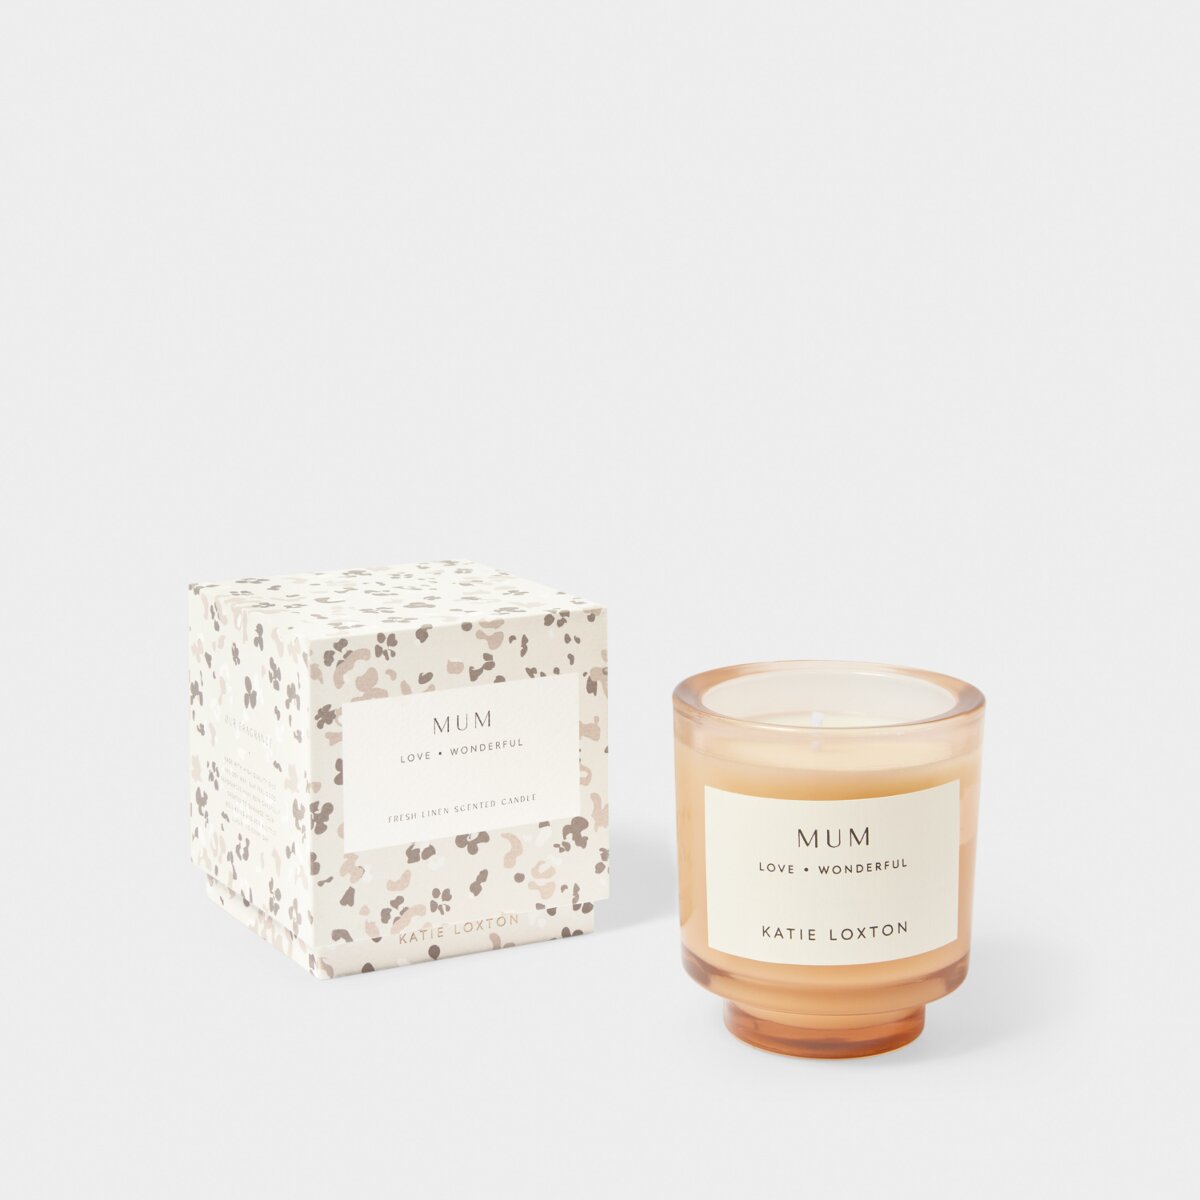 Katie Loxton | 'Mum' Sentiment Candle: Fresh Linen & White Lily | Mother's Day Gift